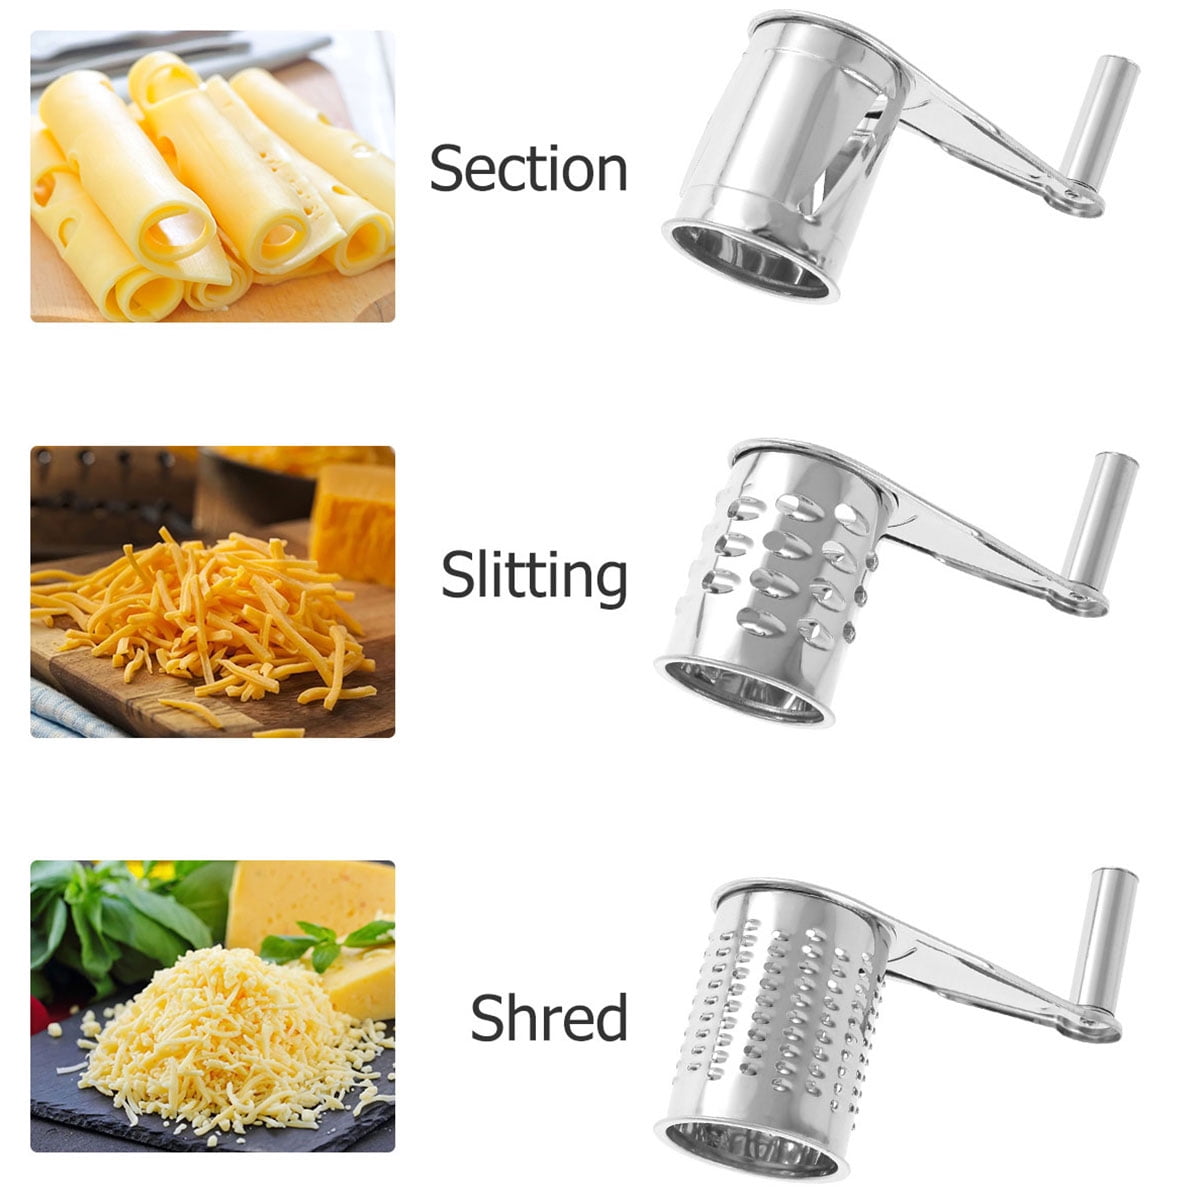  DSP Standing Rotary Cheese Grater Cheese Shredder Handheld  kitchen Cheese Grater with 3 Stainless Steel Round Interchangeable Blades &  Fruit and Vegetable Grater (White): Home & Kitchen